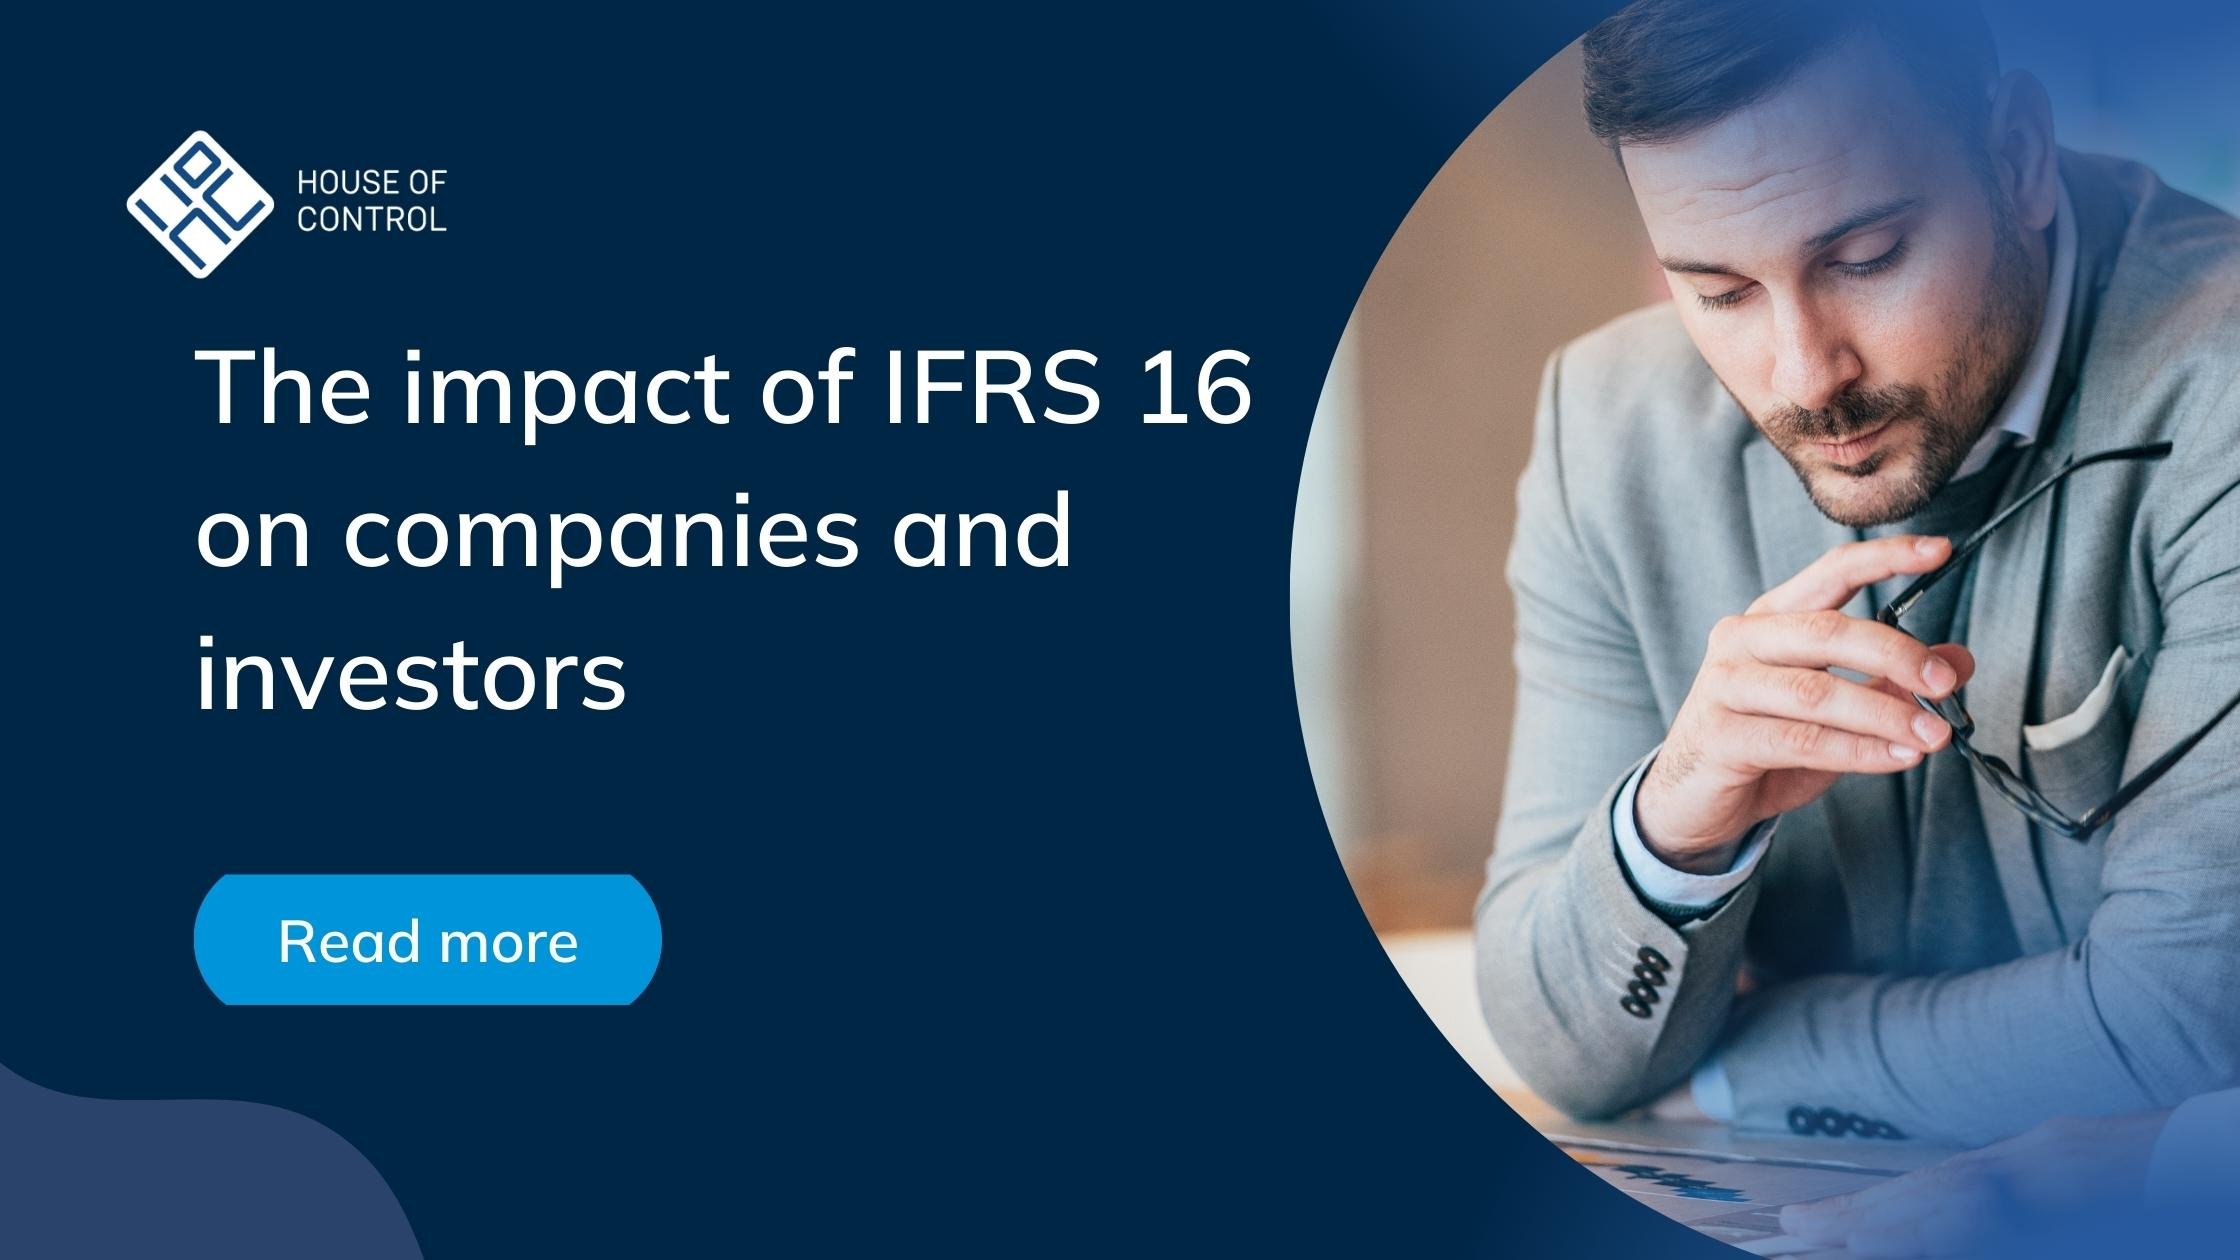 The impact of IFRS 16 on companies and investors